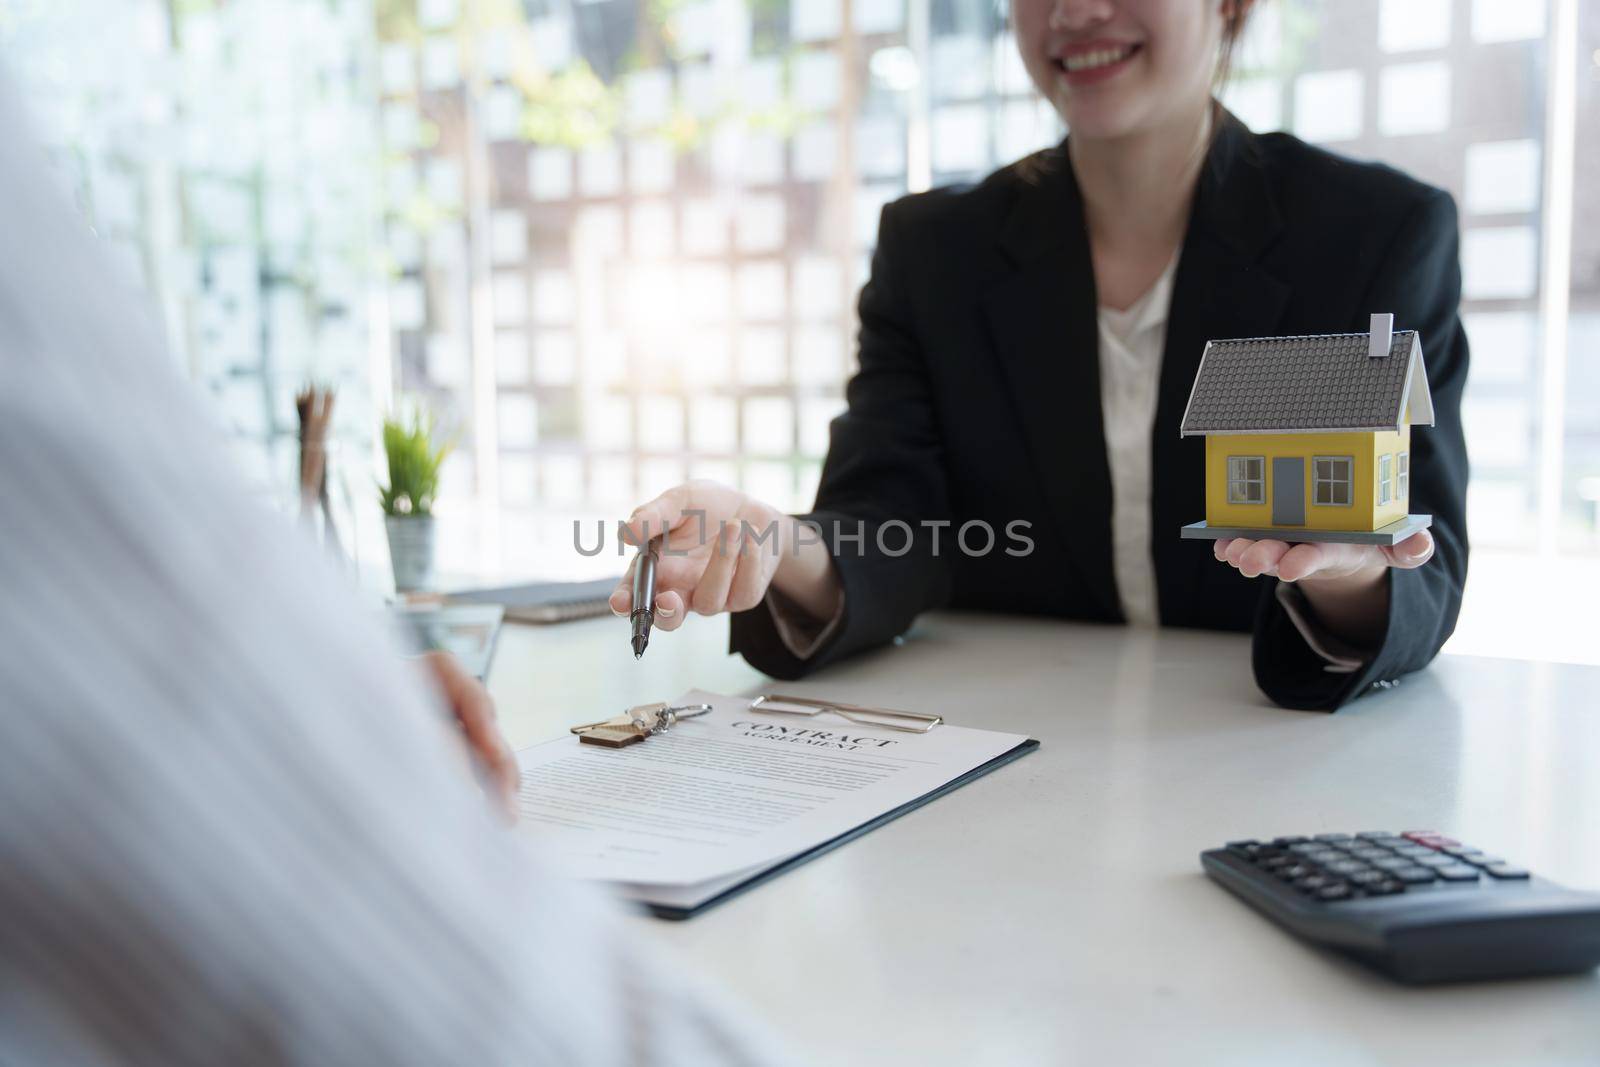 Guarantee, mortgage, agreement, contract, signed, real estate agent pointing to documents for customers to read the agreement before signing important documents.